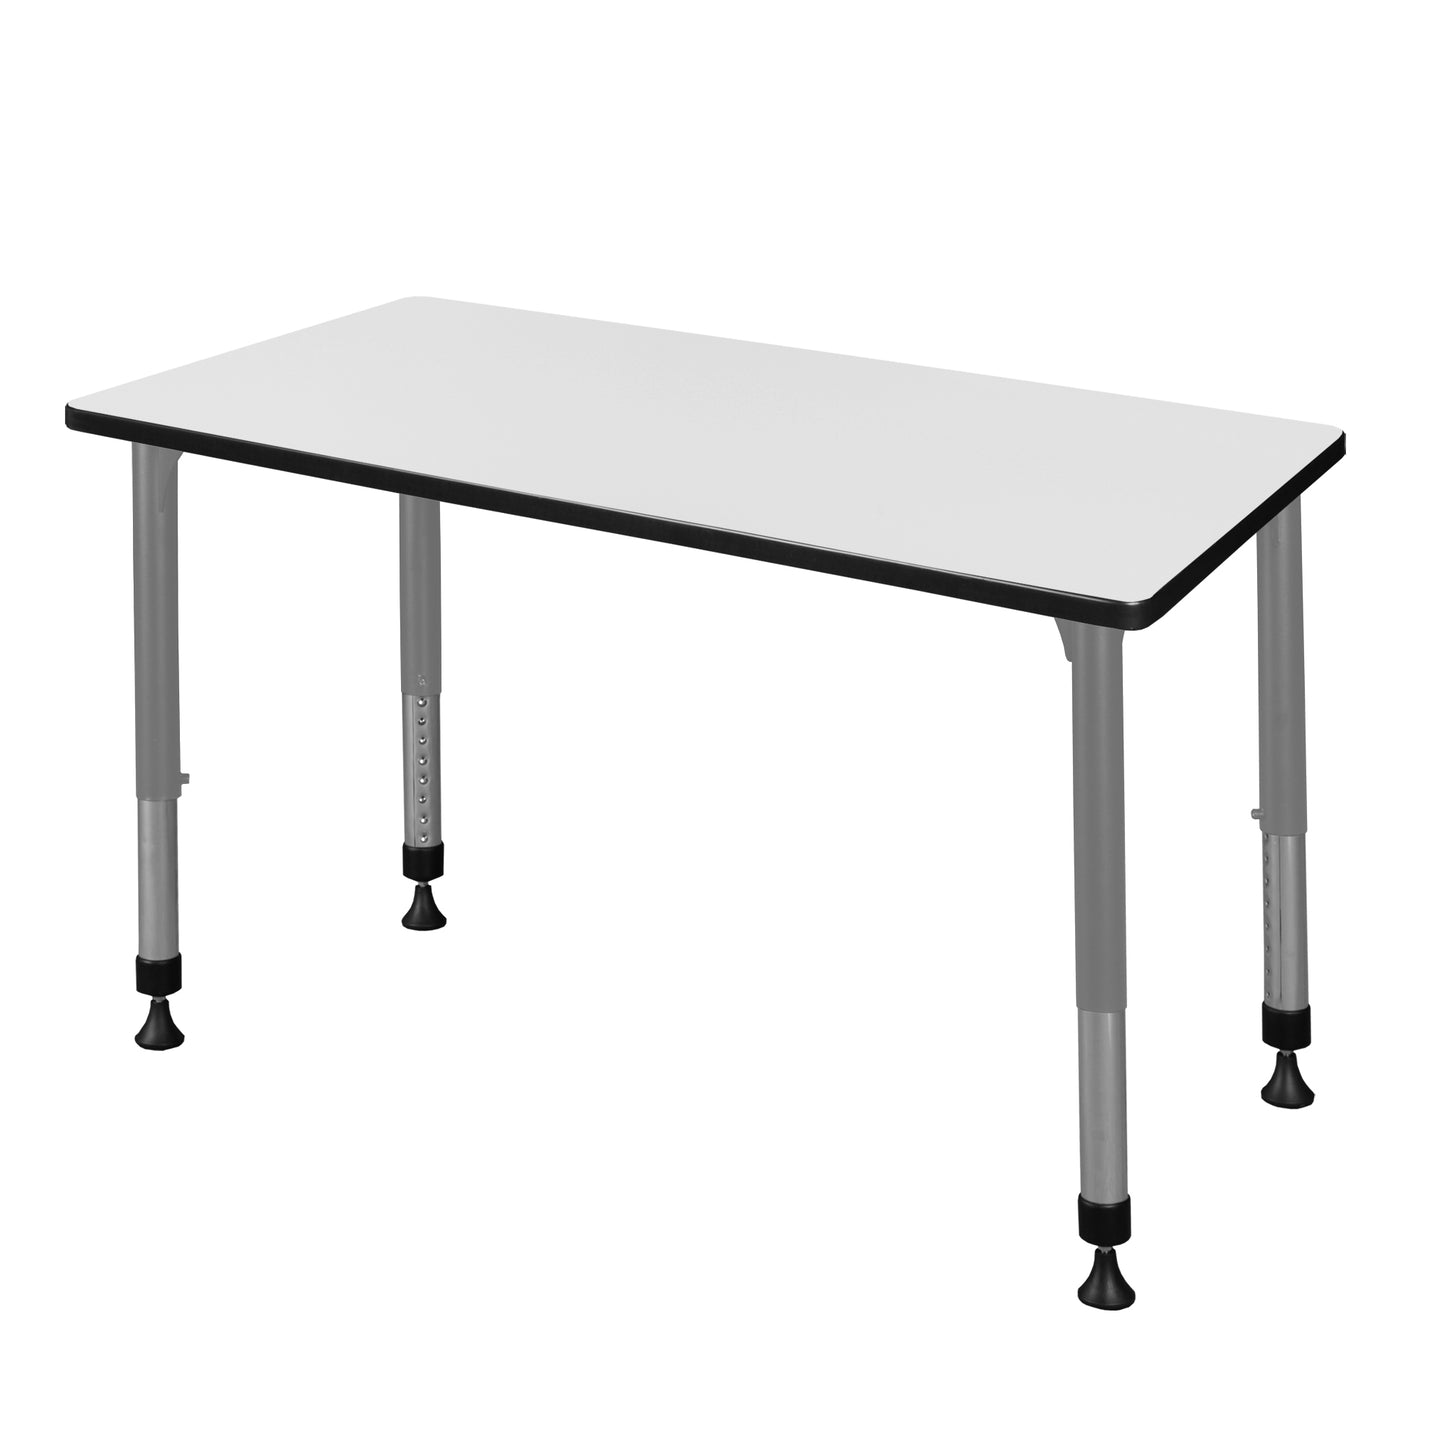 Regency Kee 48 x 24 in. Height Adjustable Mobile Classroom Activity Table